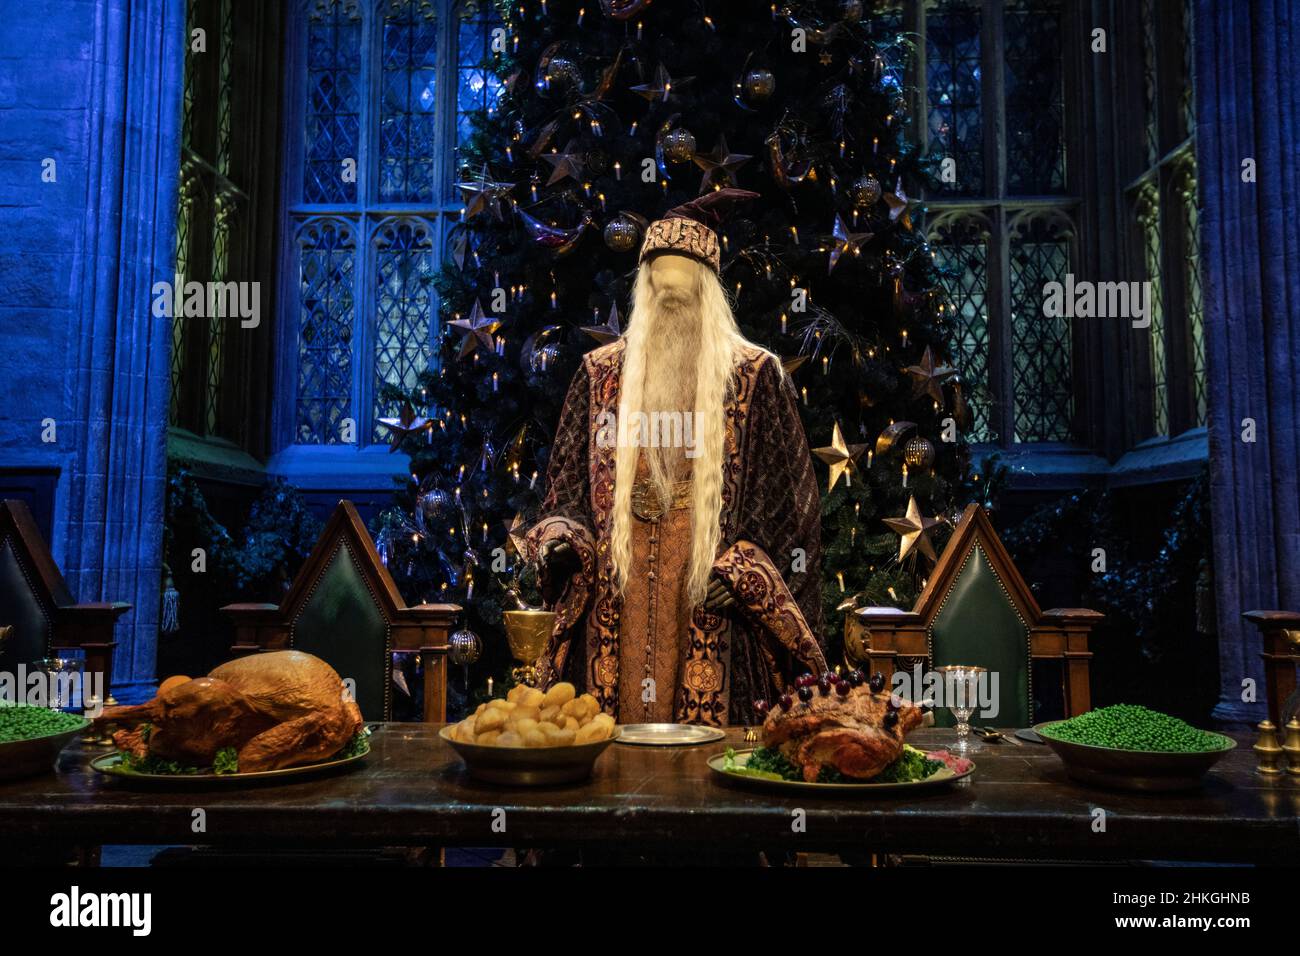 Leavesden, UK - January 9th 2022: A festive Great Hall of Hogwarts, and Dumbledore costume, at The Making of Harry Potter tour at the Warner Bros. Stu Stock Photo